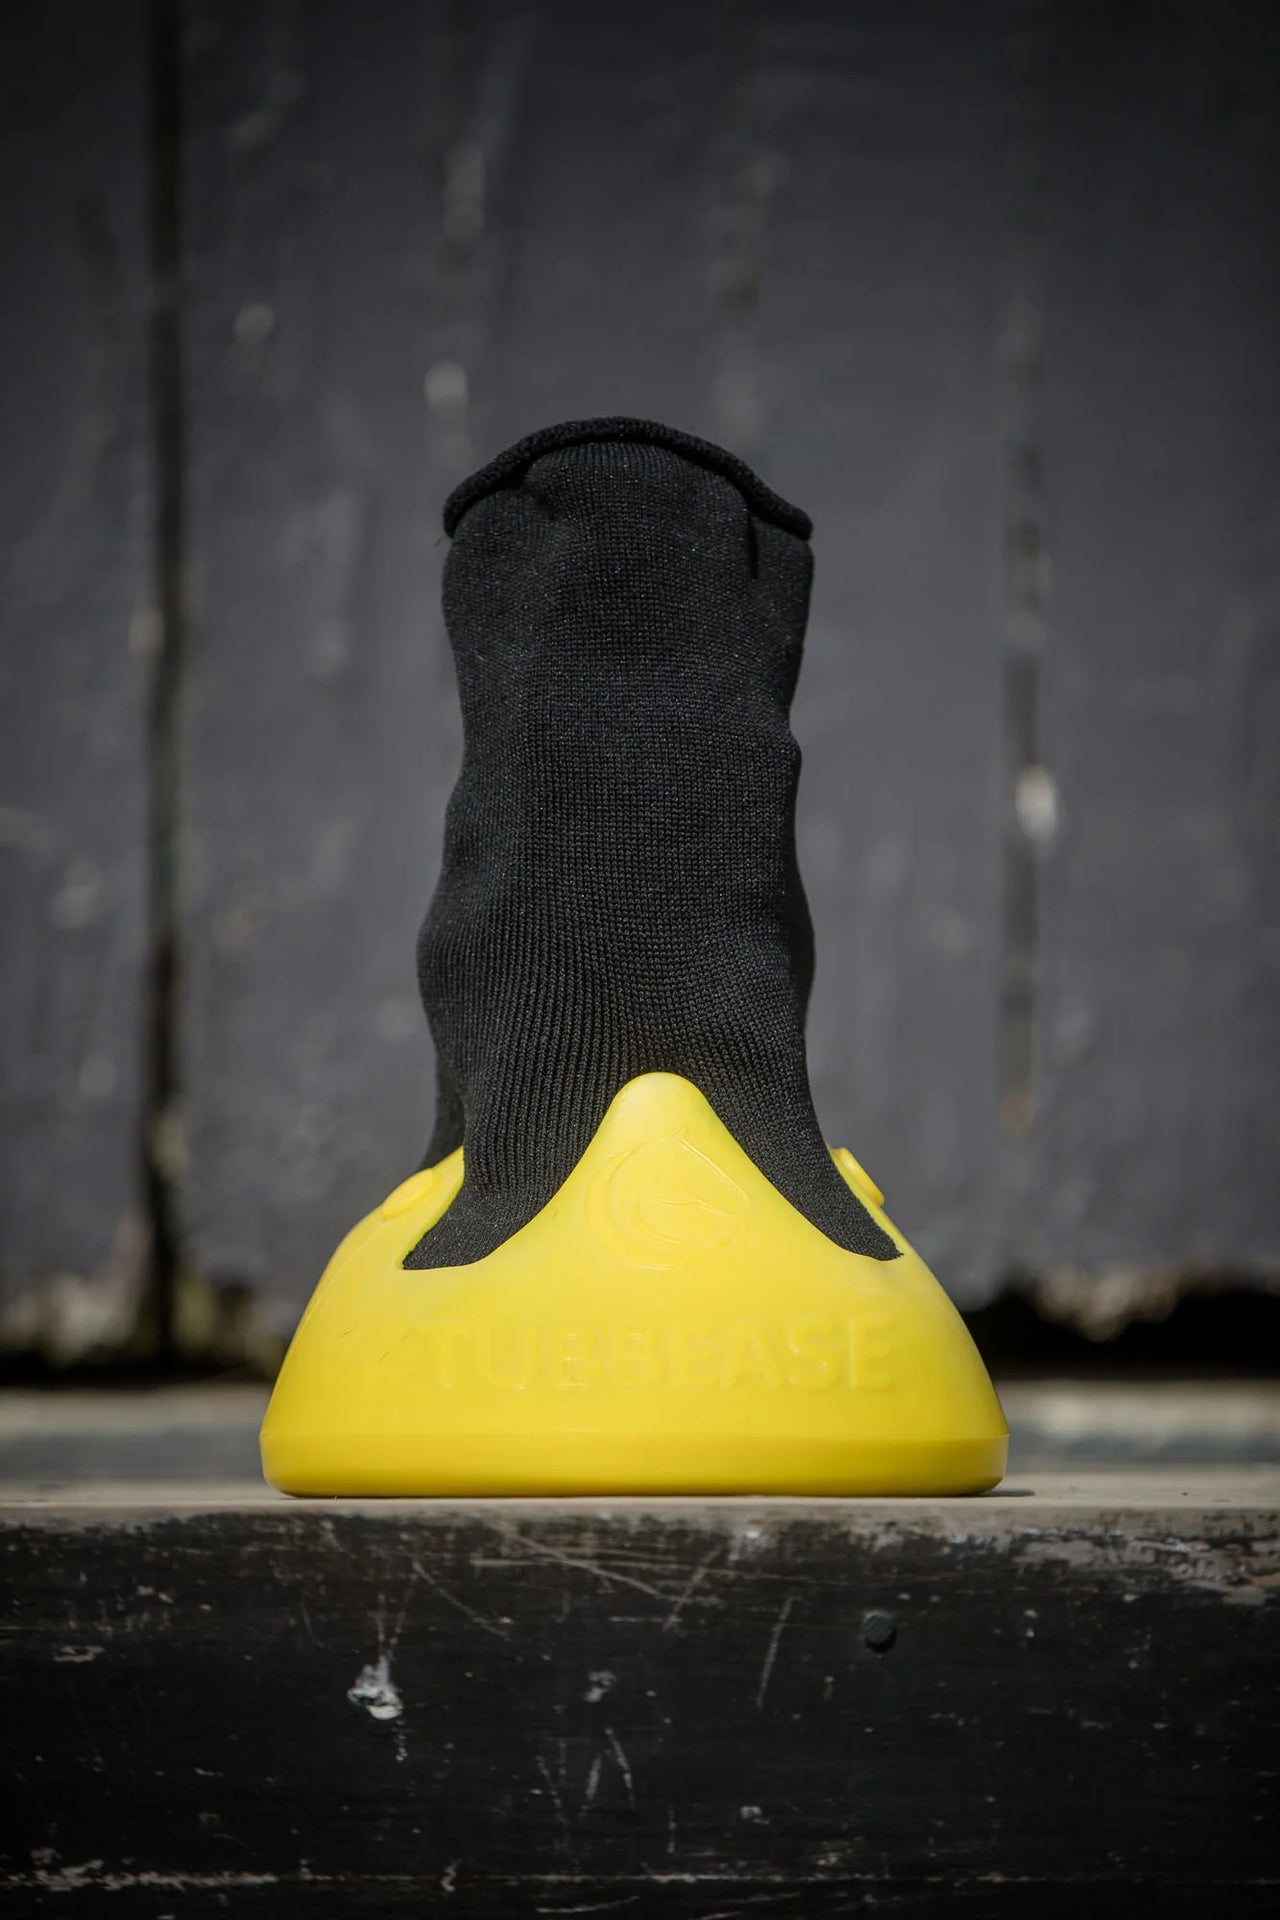 Tubbease Hoof Sock Yellow 175mm - The Trading Stables